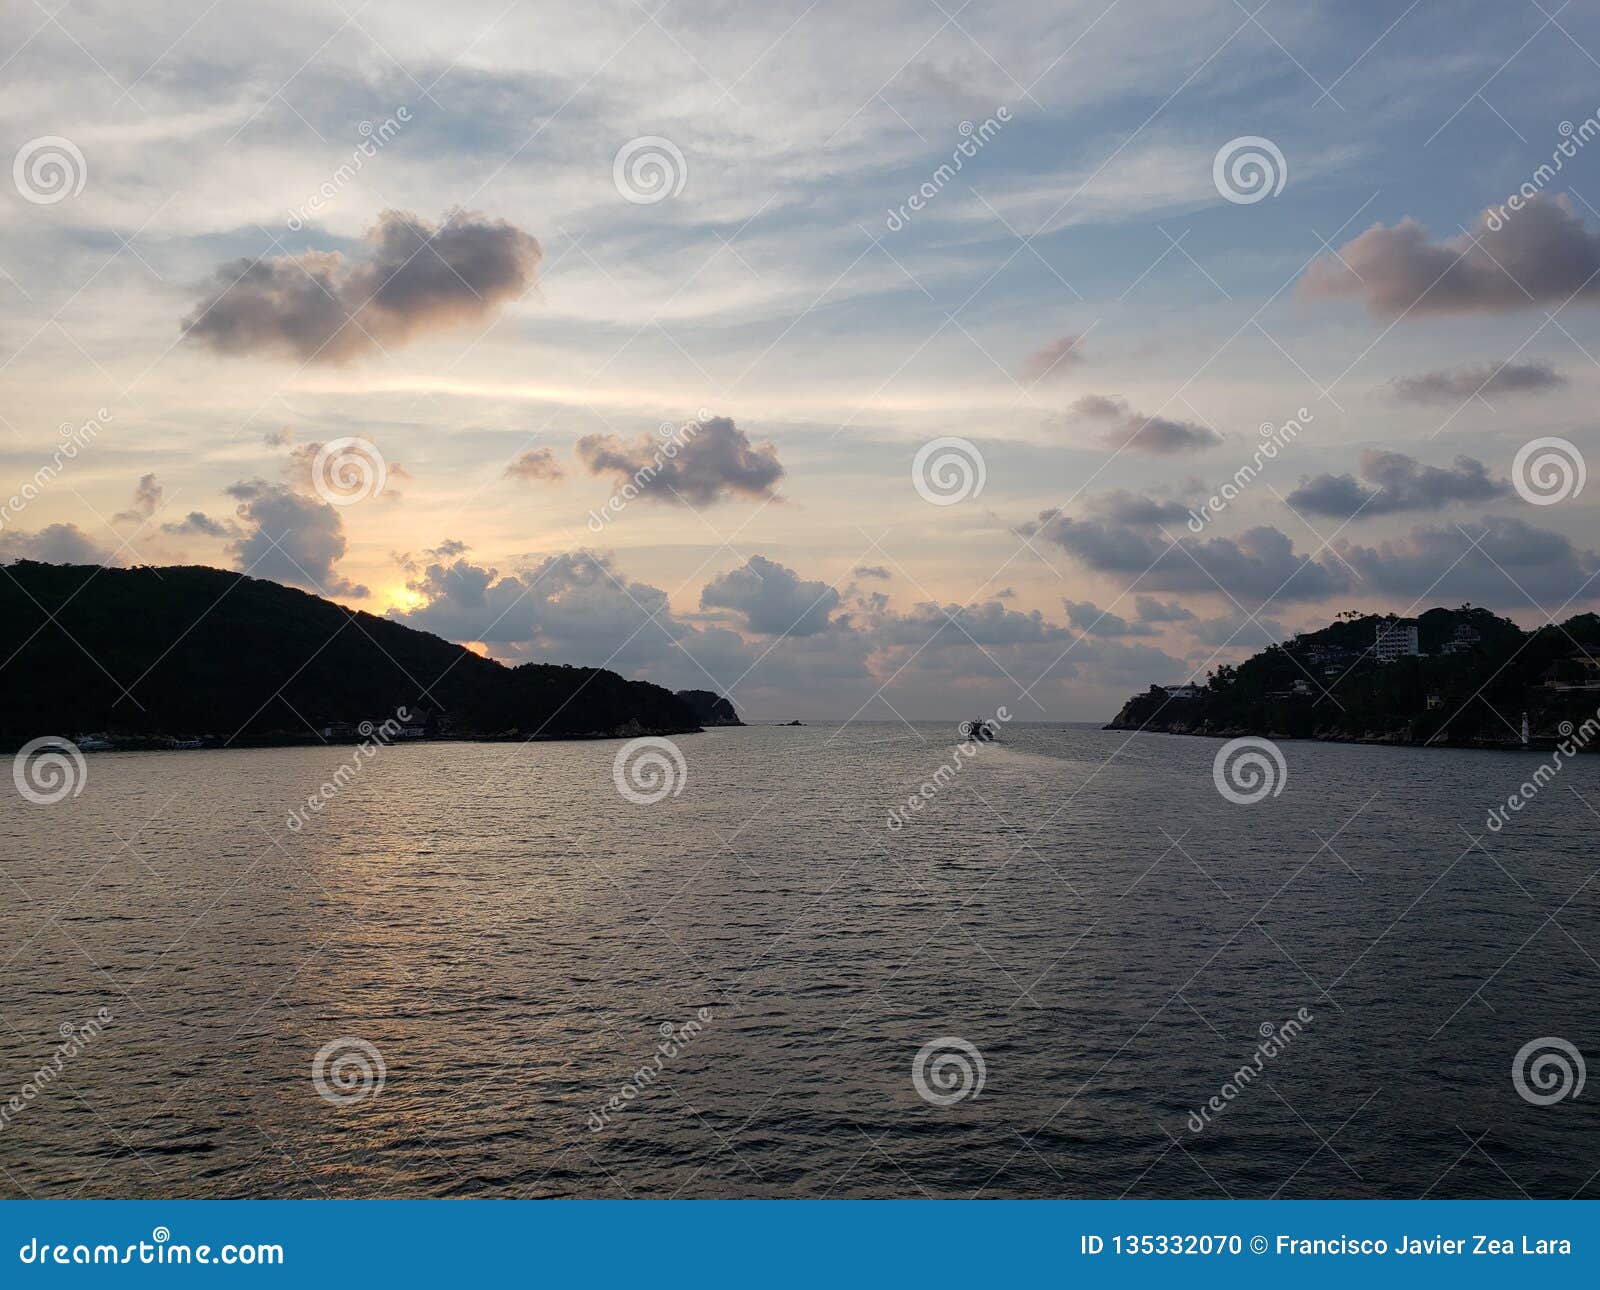 landscape with the tip of the island of la roqueta in acapulco bay at dusk